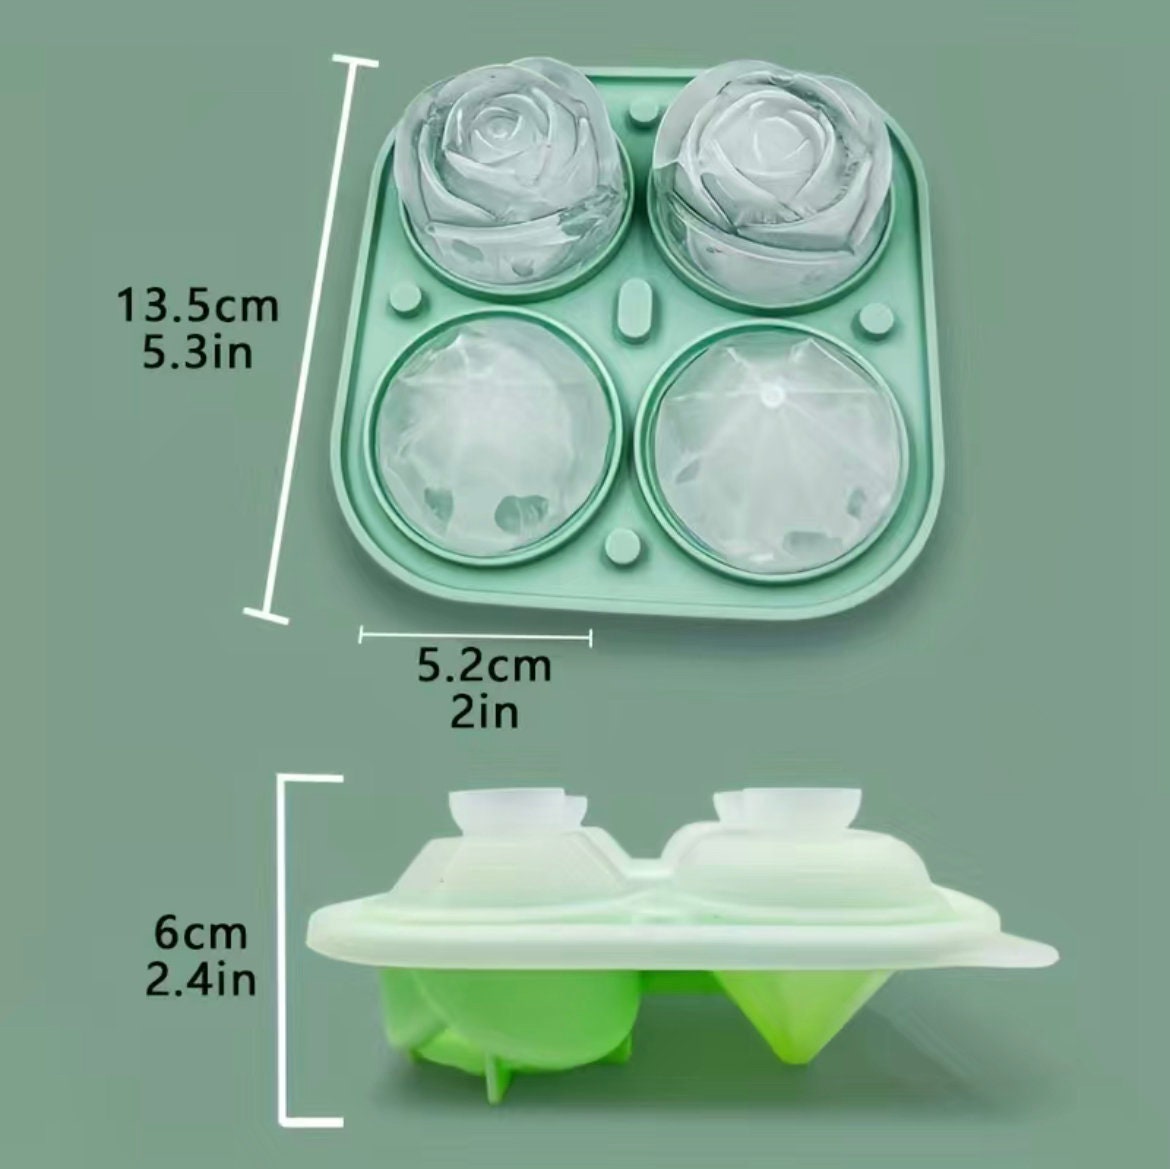 Chef Craft 3pc Flexible Thermoplastic 10-Cube Ice Cube Tray Set